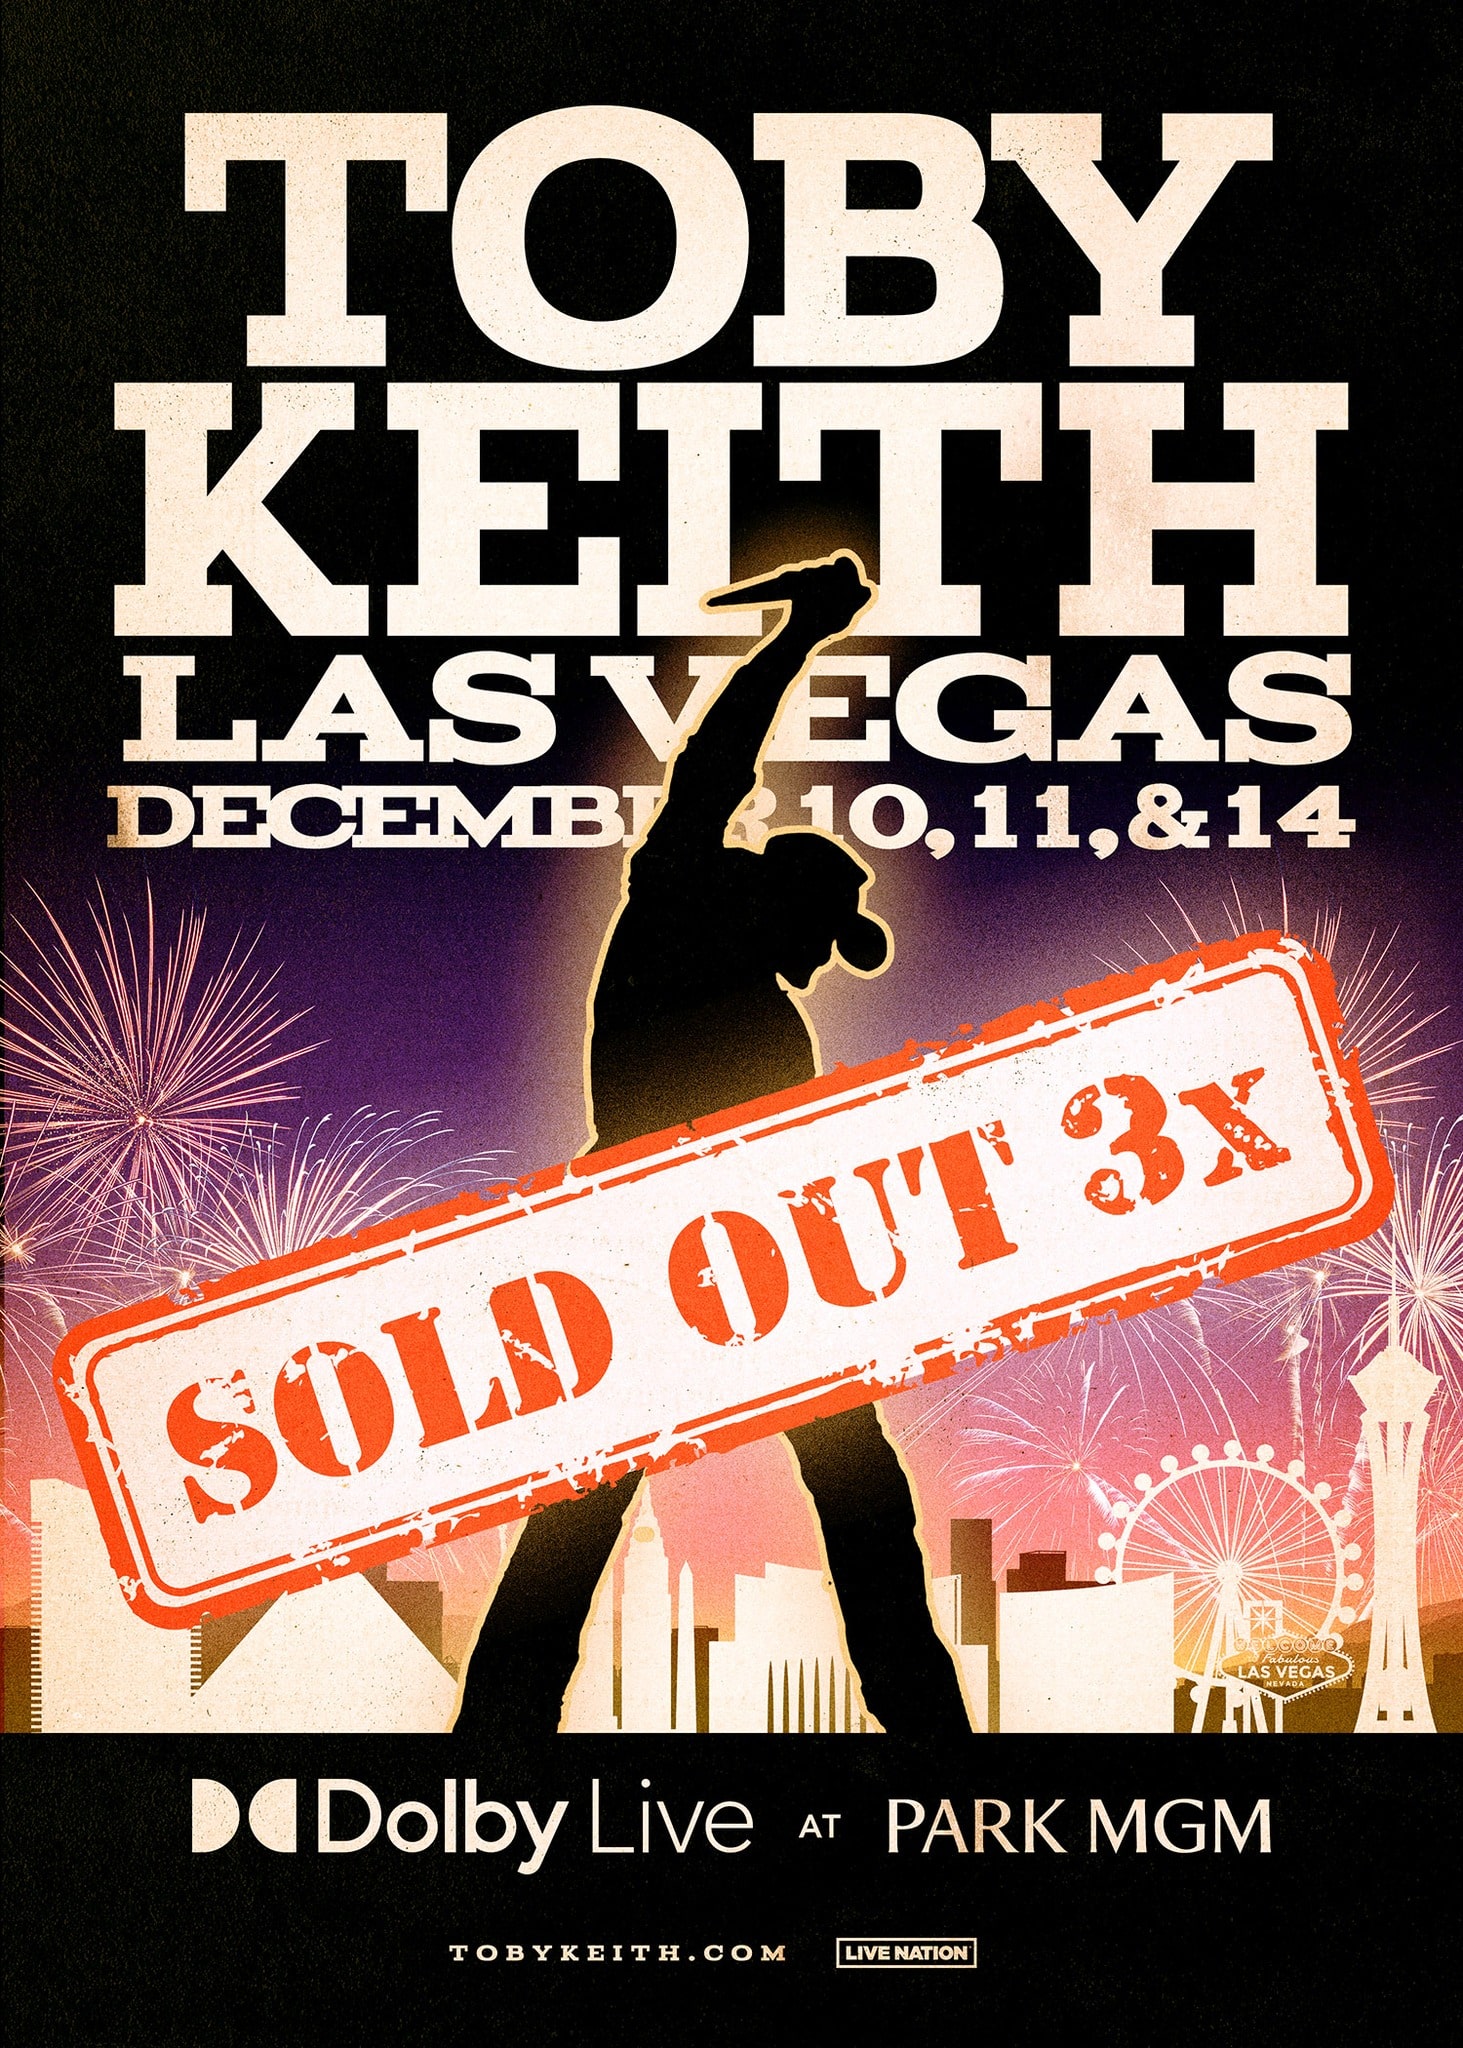 Toby Keith sold out all three of his comeback shows in Las Vegas